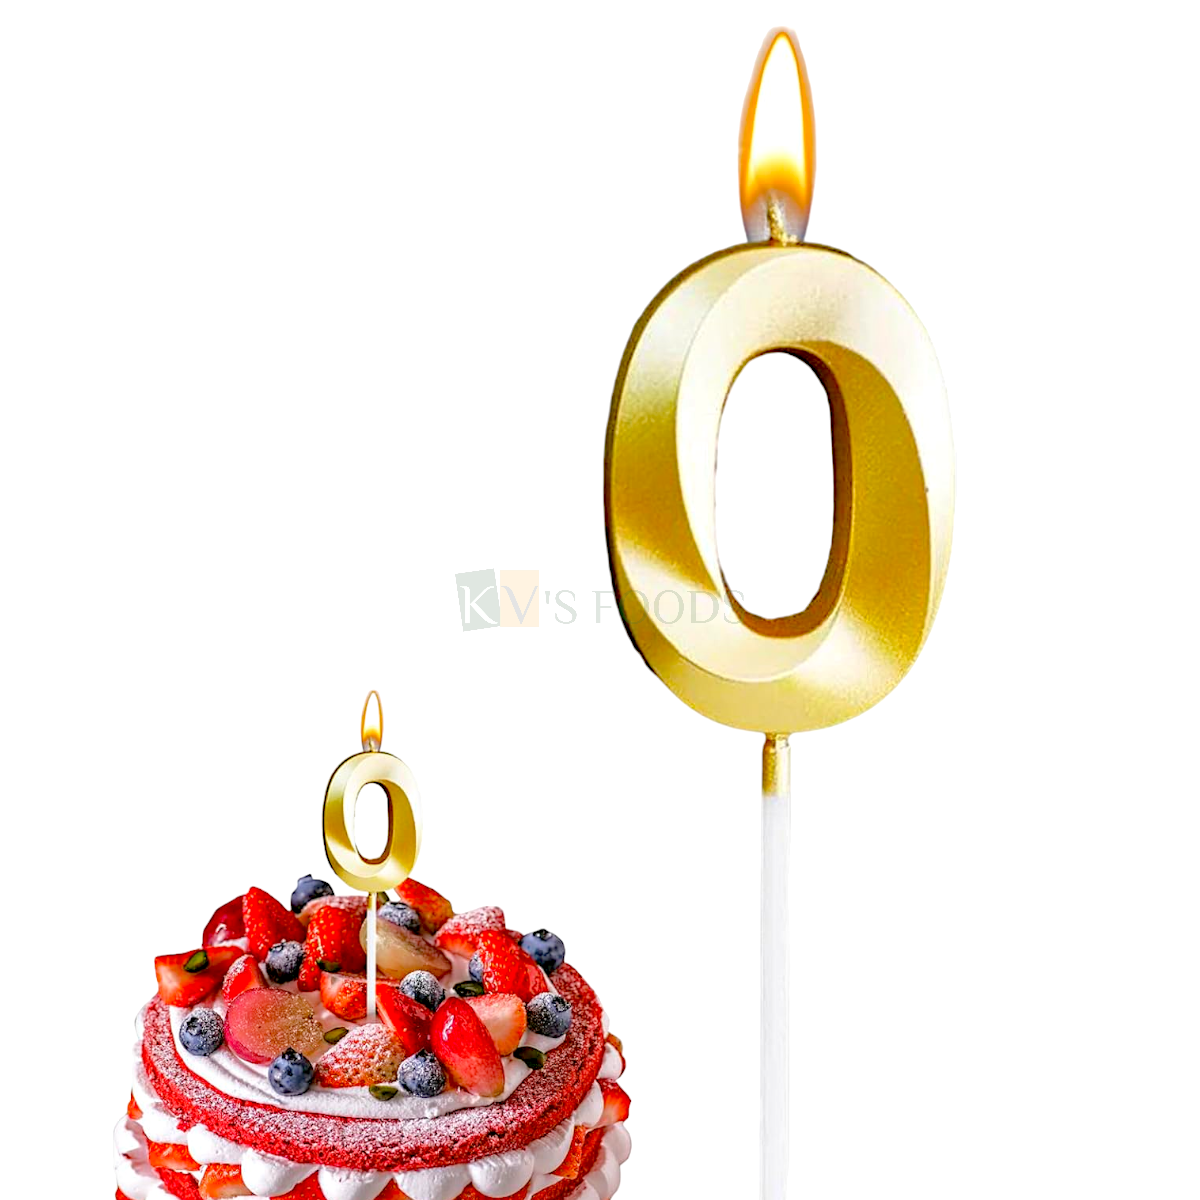 1PC Metallic Golden Colour Shiny 0 Number Wax Candle Cake Topper, 0 Number Theme Zero Cake Insert, Can Be Used As Combination With Other Number DIY Cake Decorations